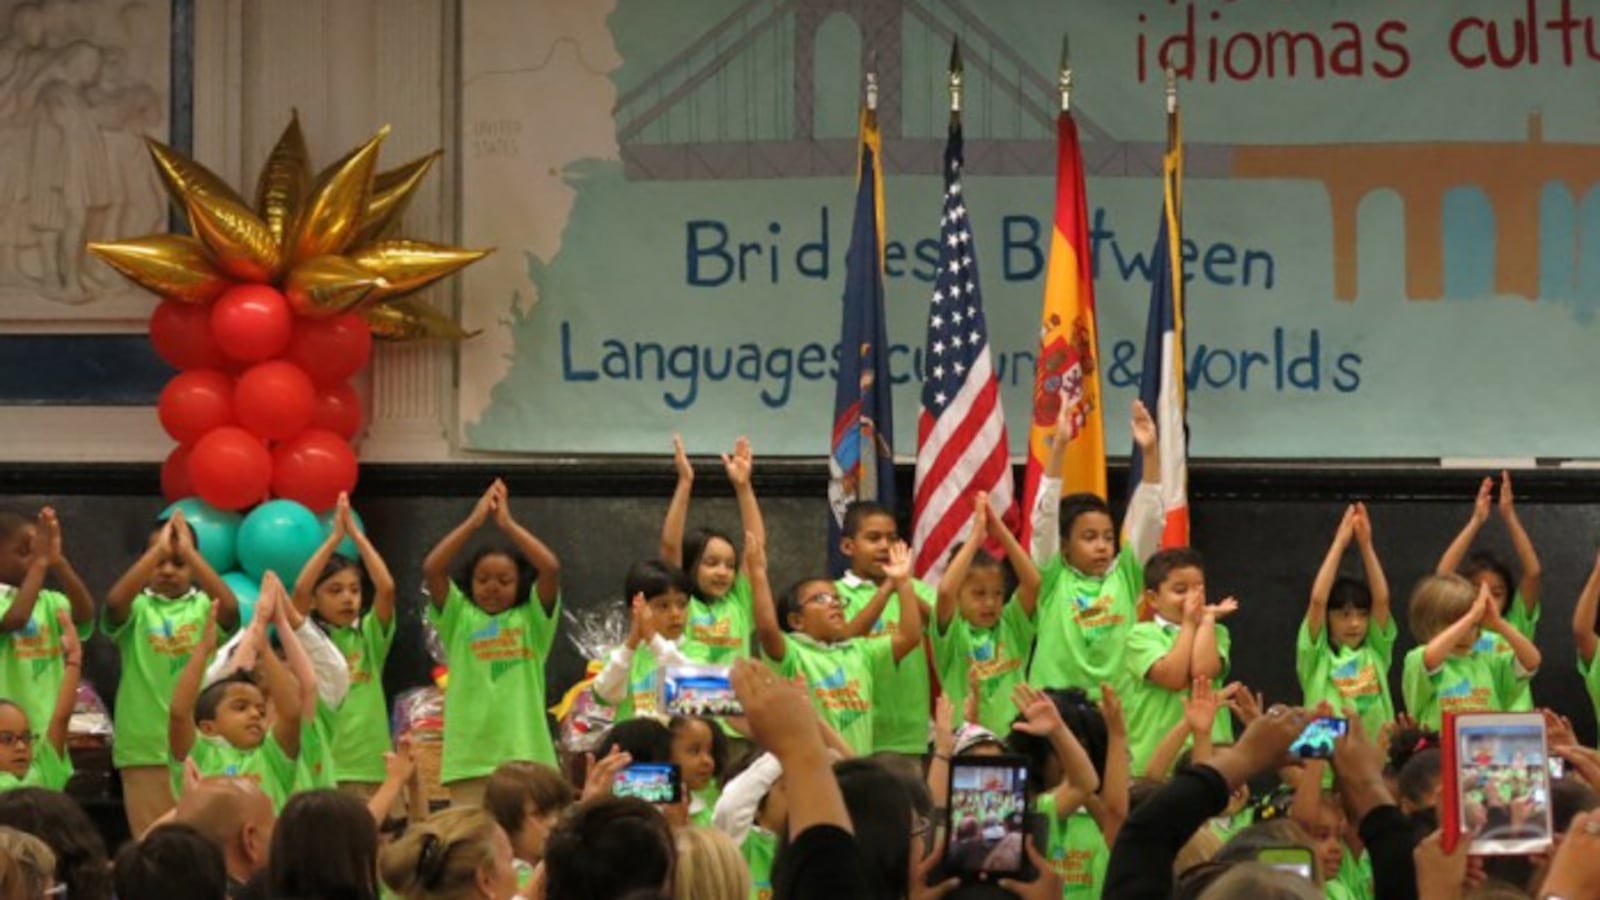 Students in a Spanish-English dual language program at P.S. 103 Dos Puentes Elementary School in Manhattan.